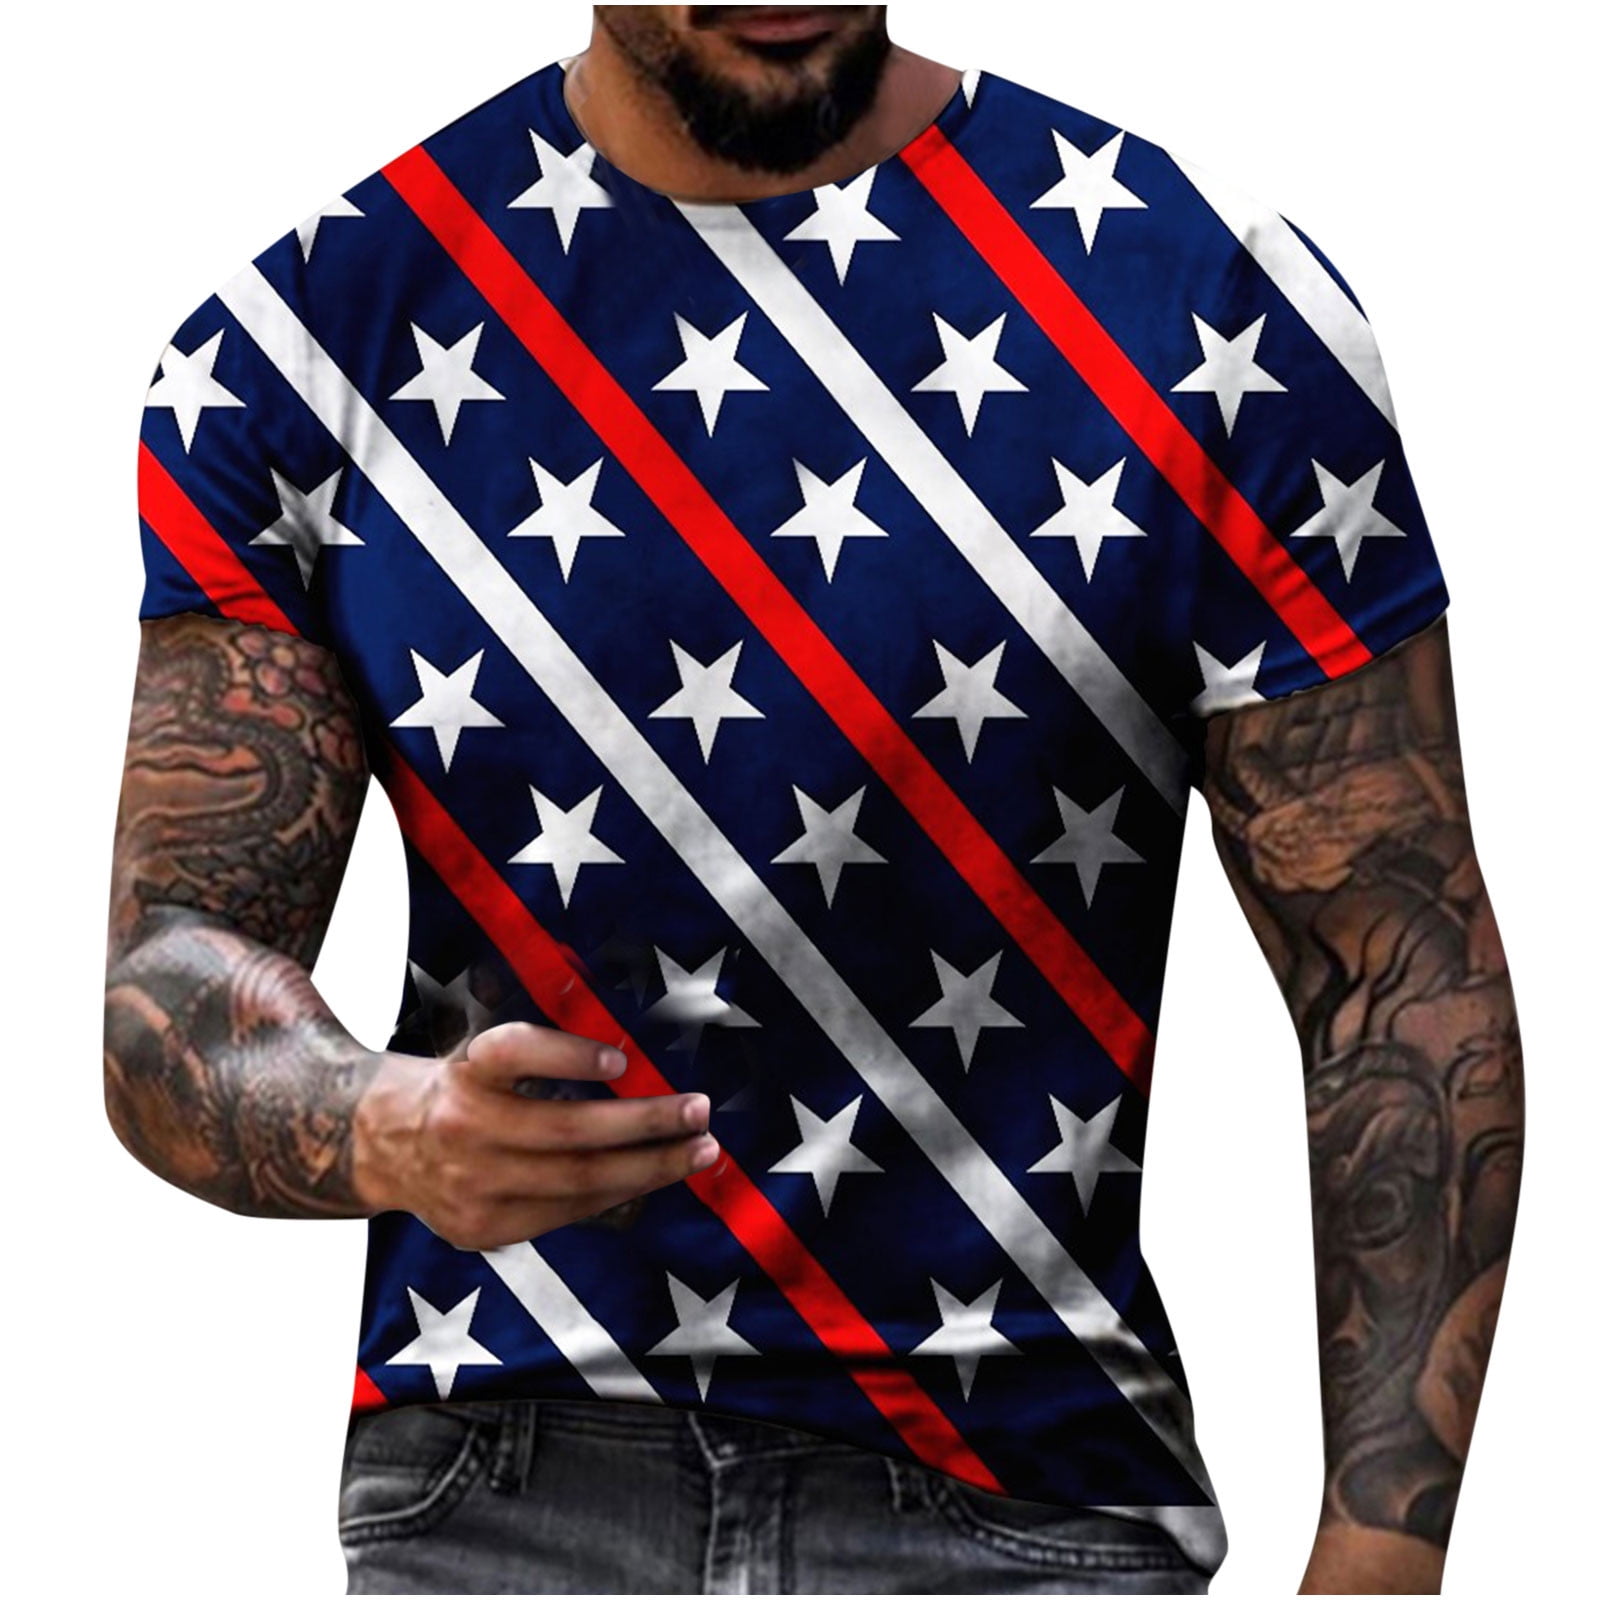 4th of July Tops for Men's Vintage American Flag Printed T-Shirt US ...